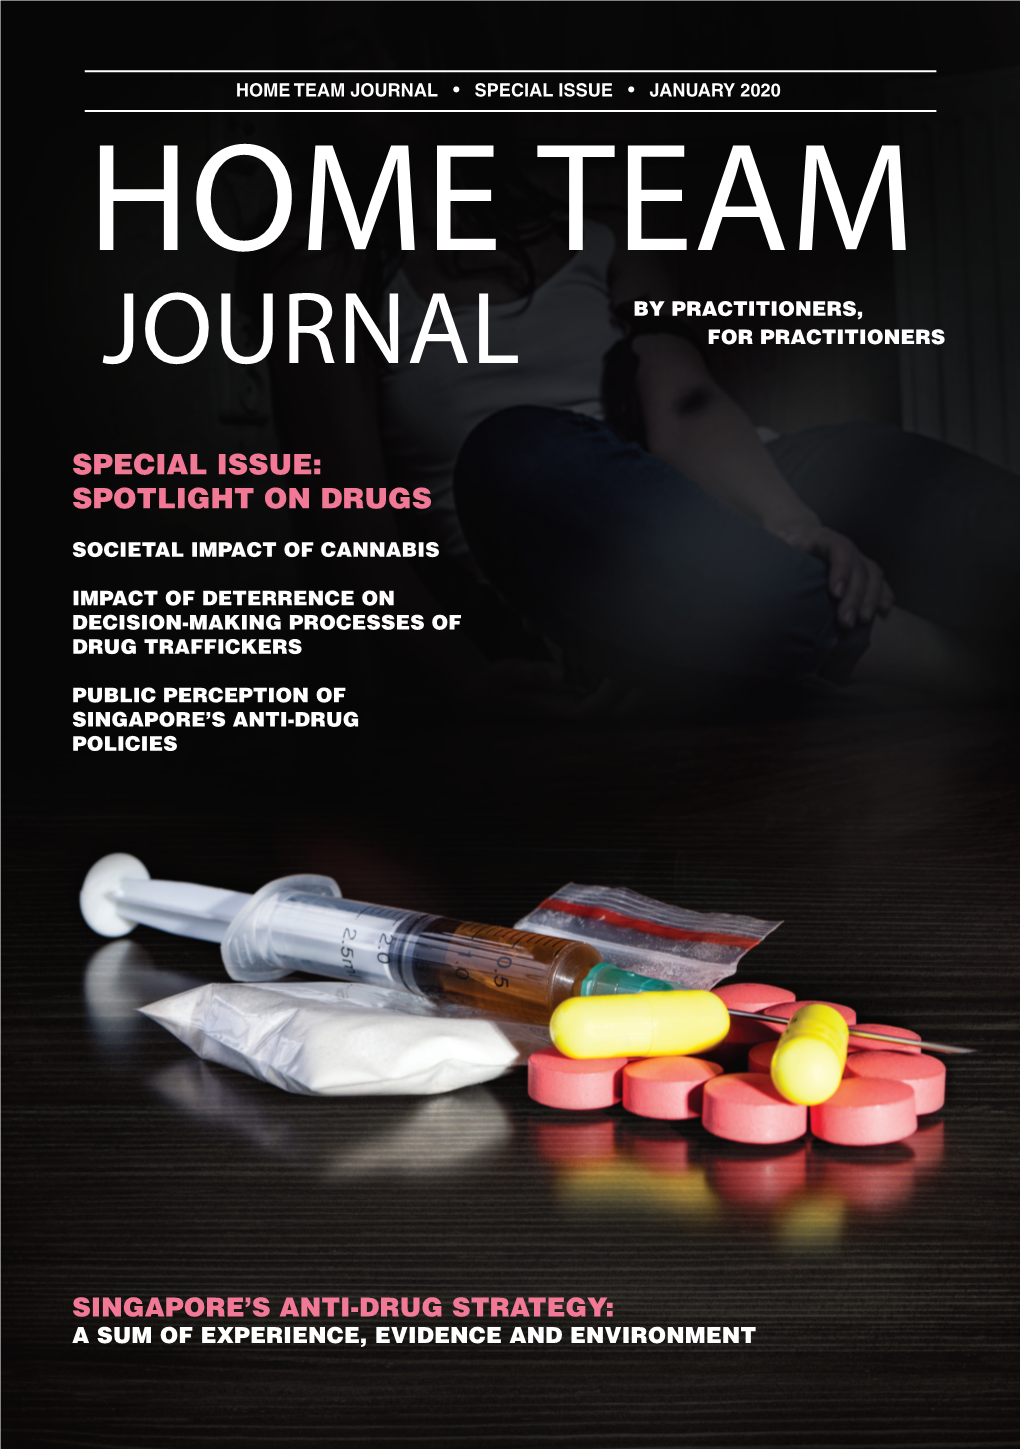 Special Issue of the Home Team Journal Titled “Spotlight on Drugs”